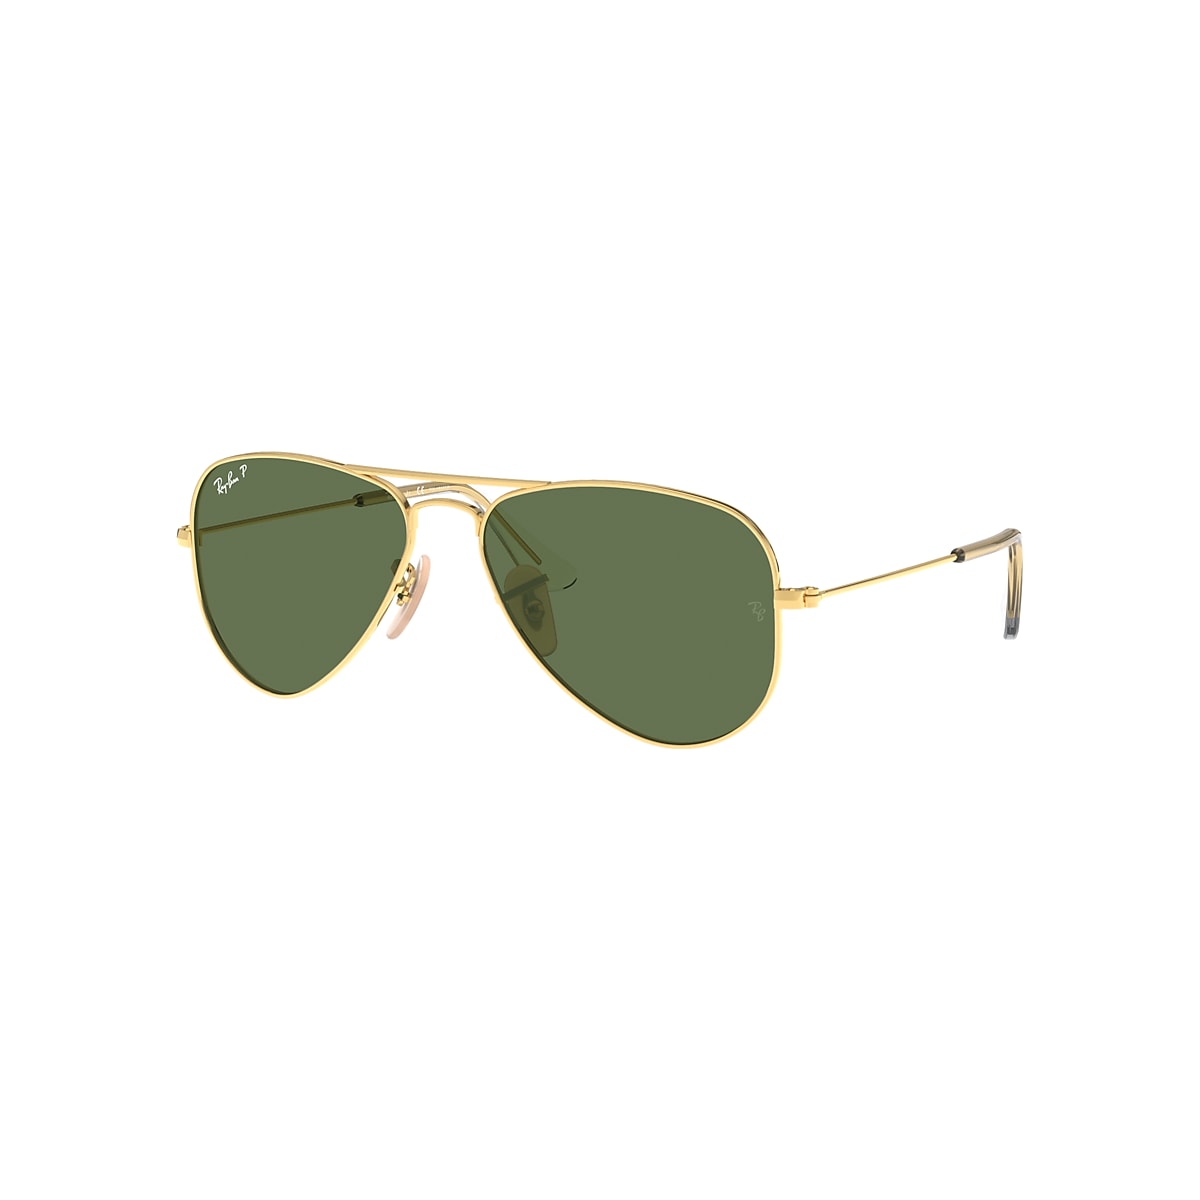 AVIATOR KIDS Sunglasses in Gold and Green - RB9506S